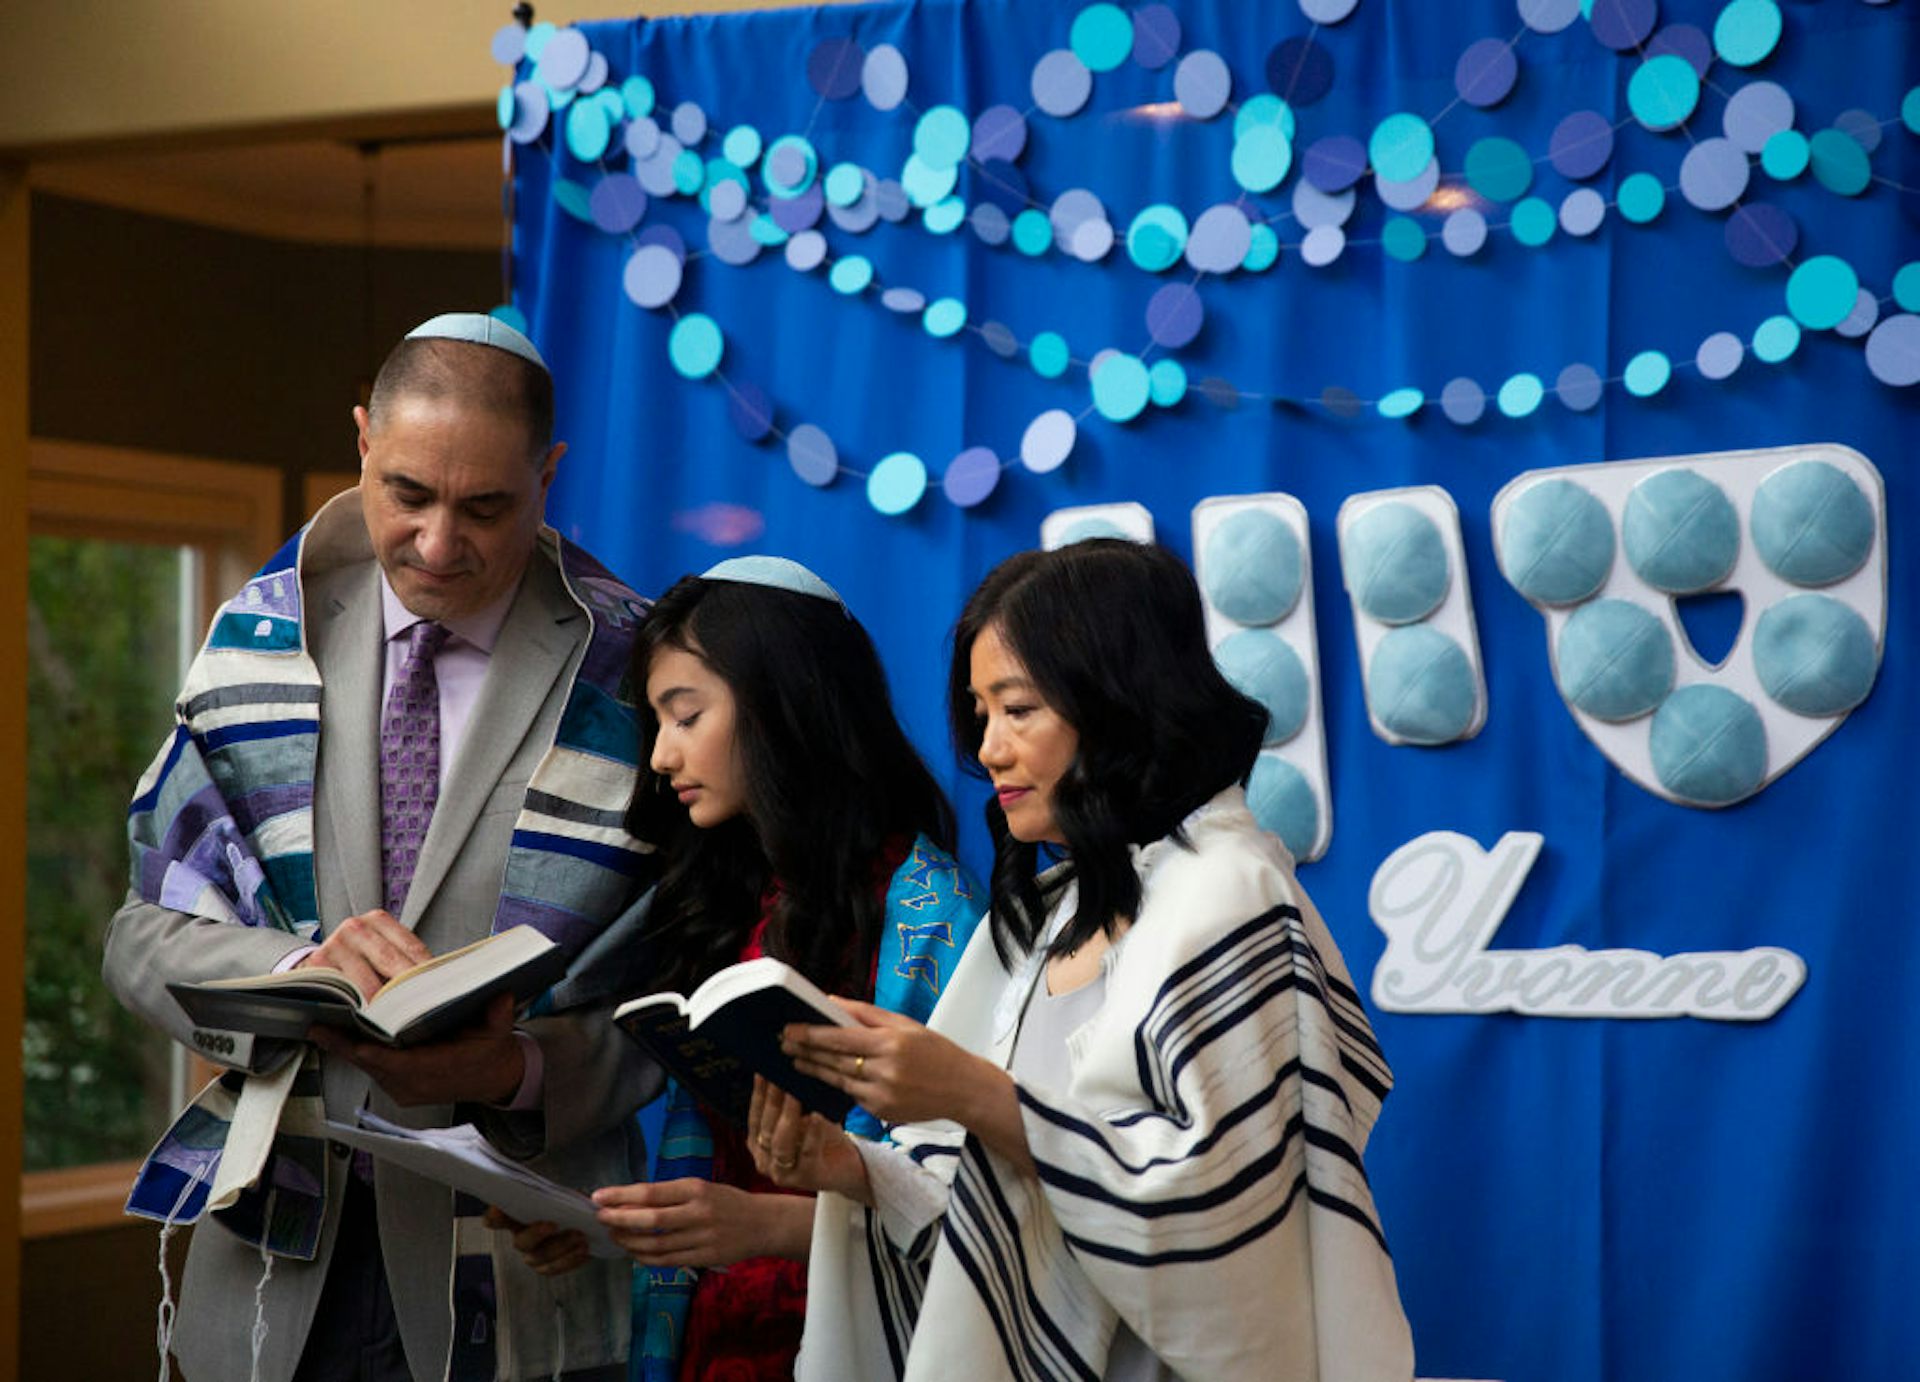 The first bat mitzvah was 100 years ago ...